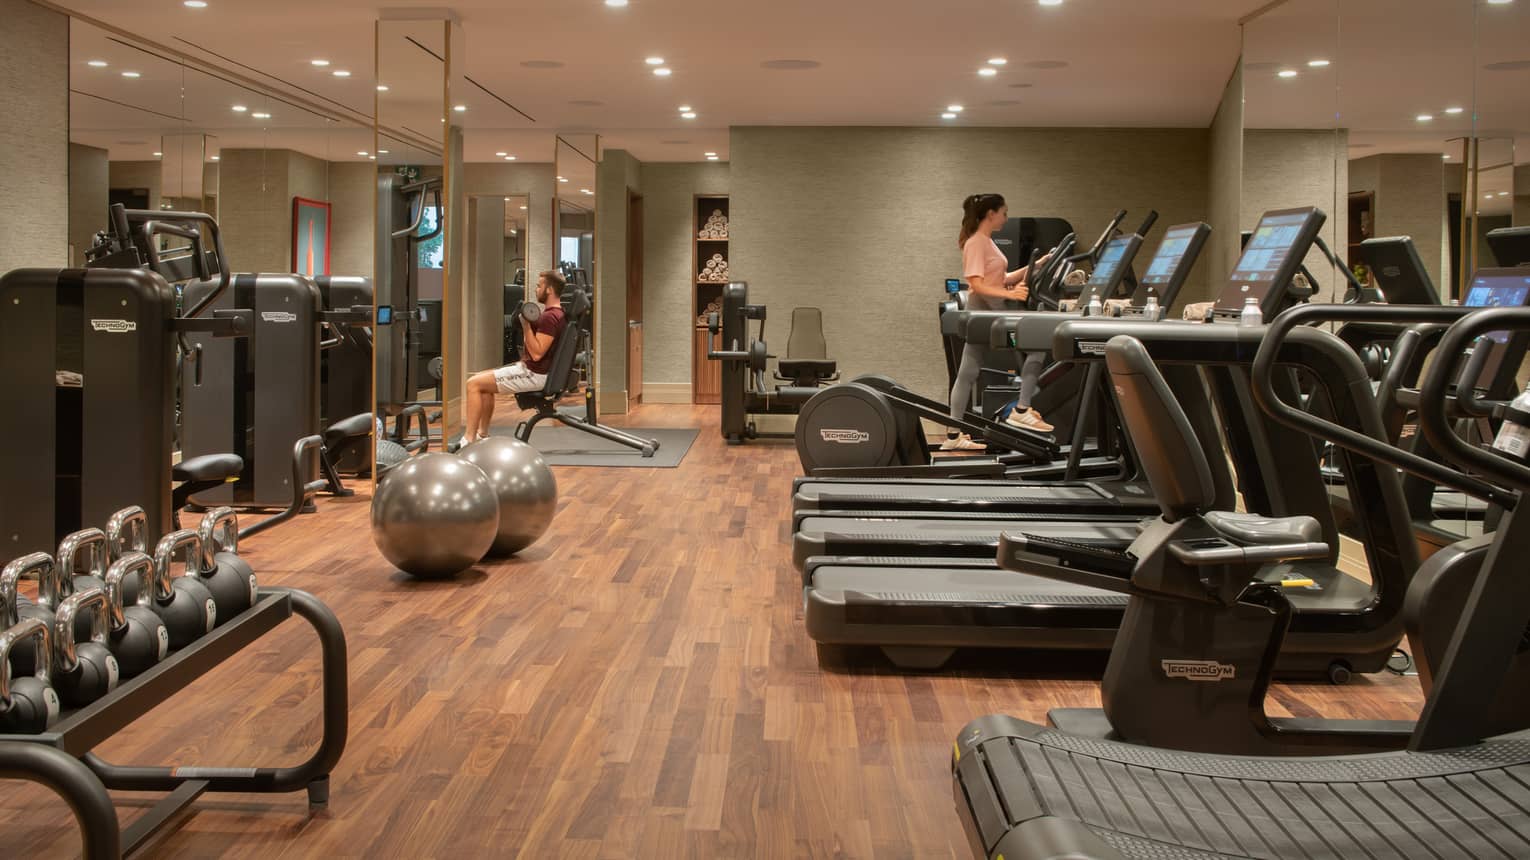 Indoor gym with a woman on the elliptical, three treadmills, free weights